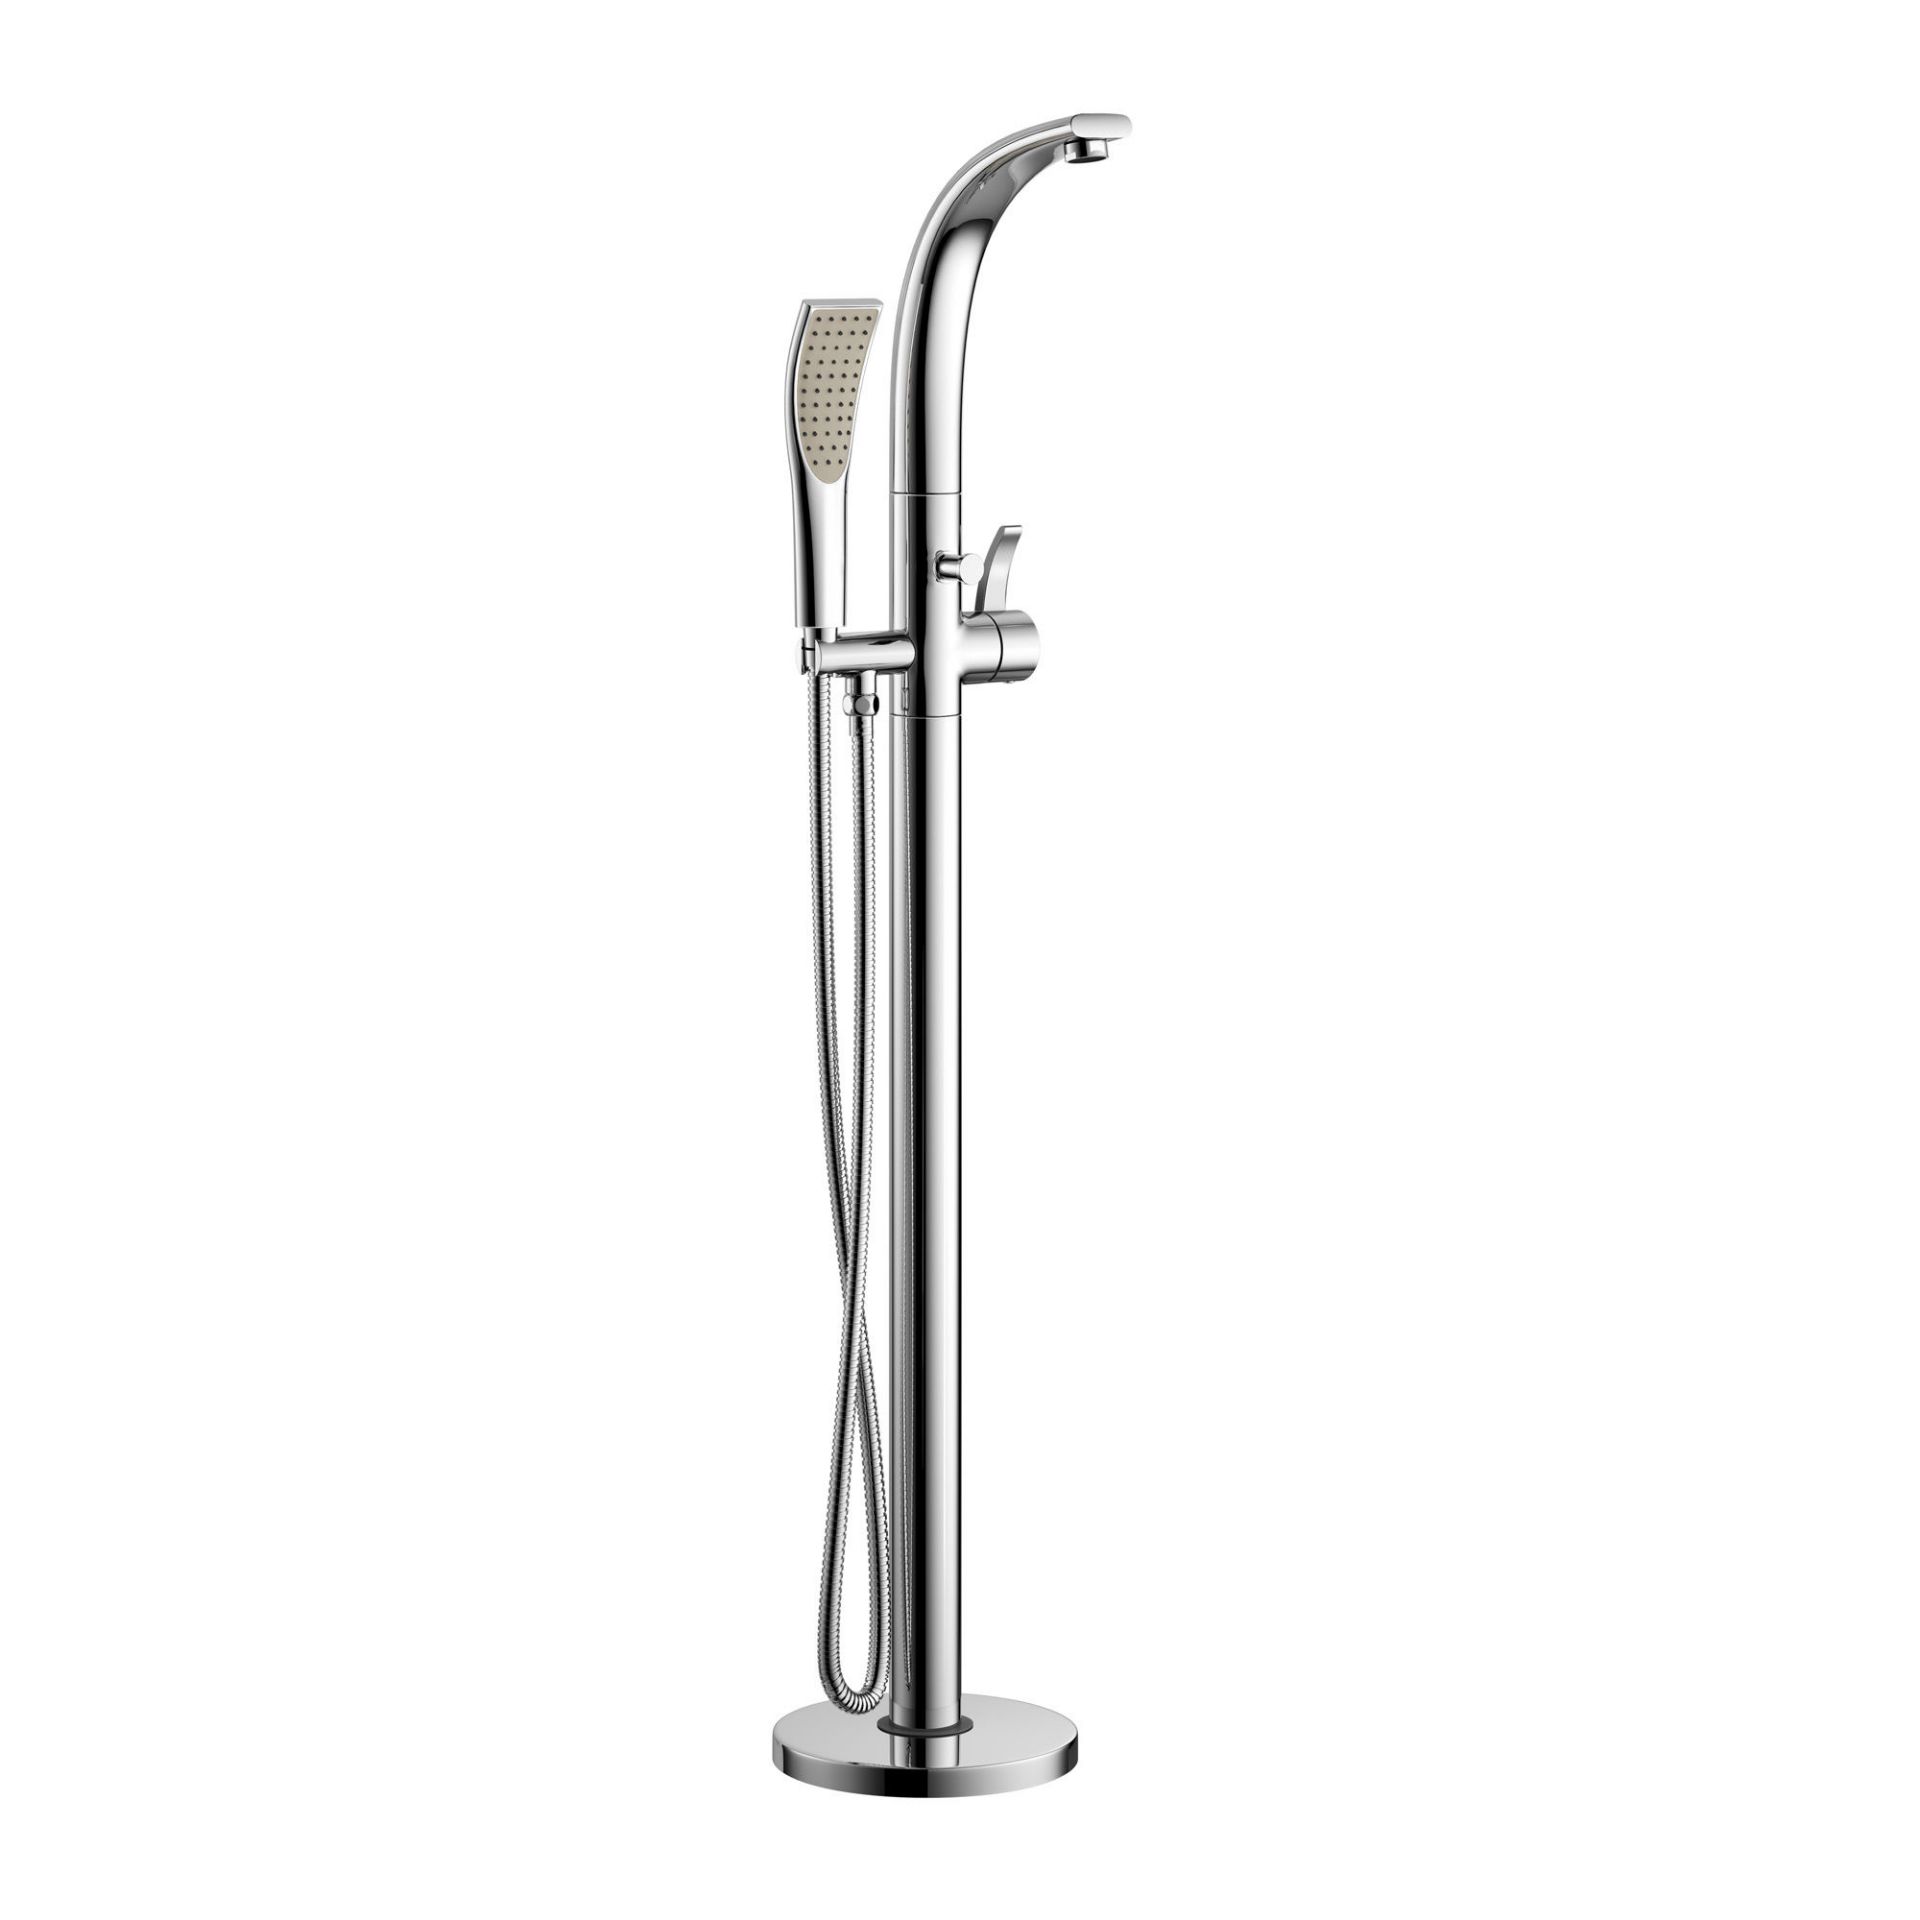 (WG8) Ava Freestanding Bath Mixer Tap with Handheld Shower Head. We love this because it has a